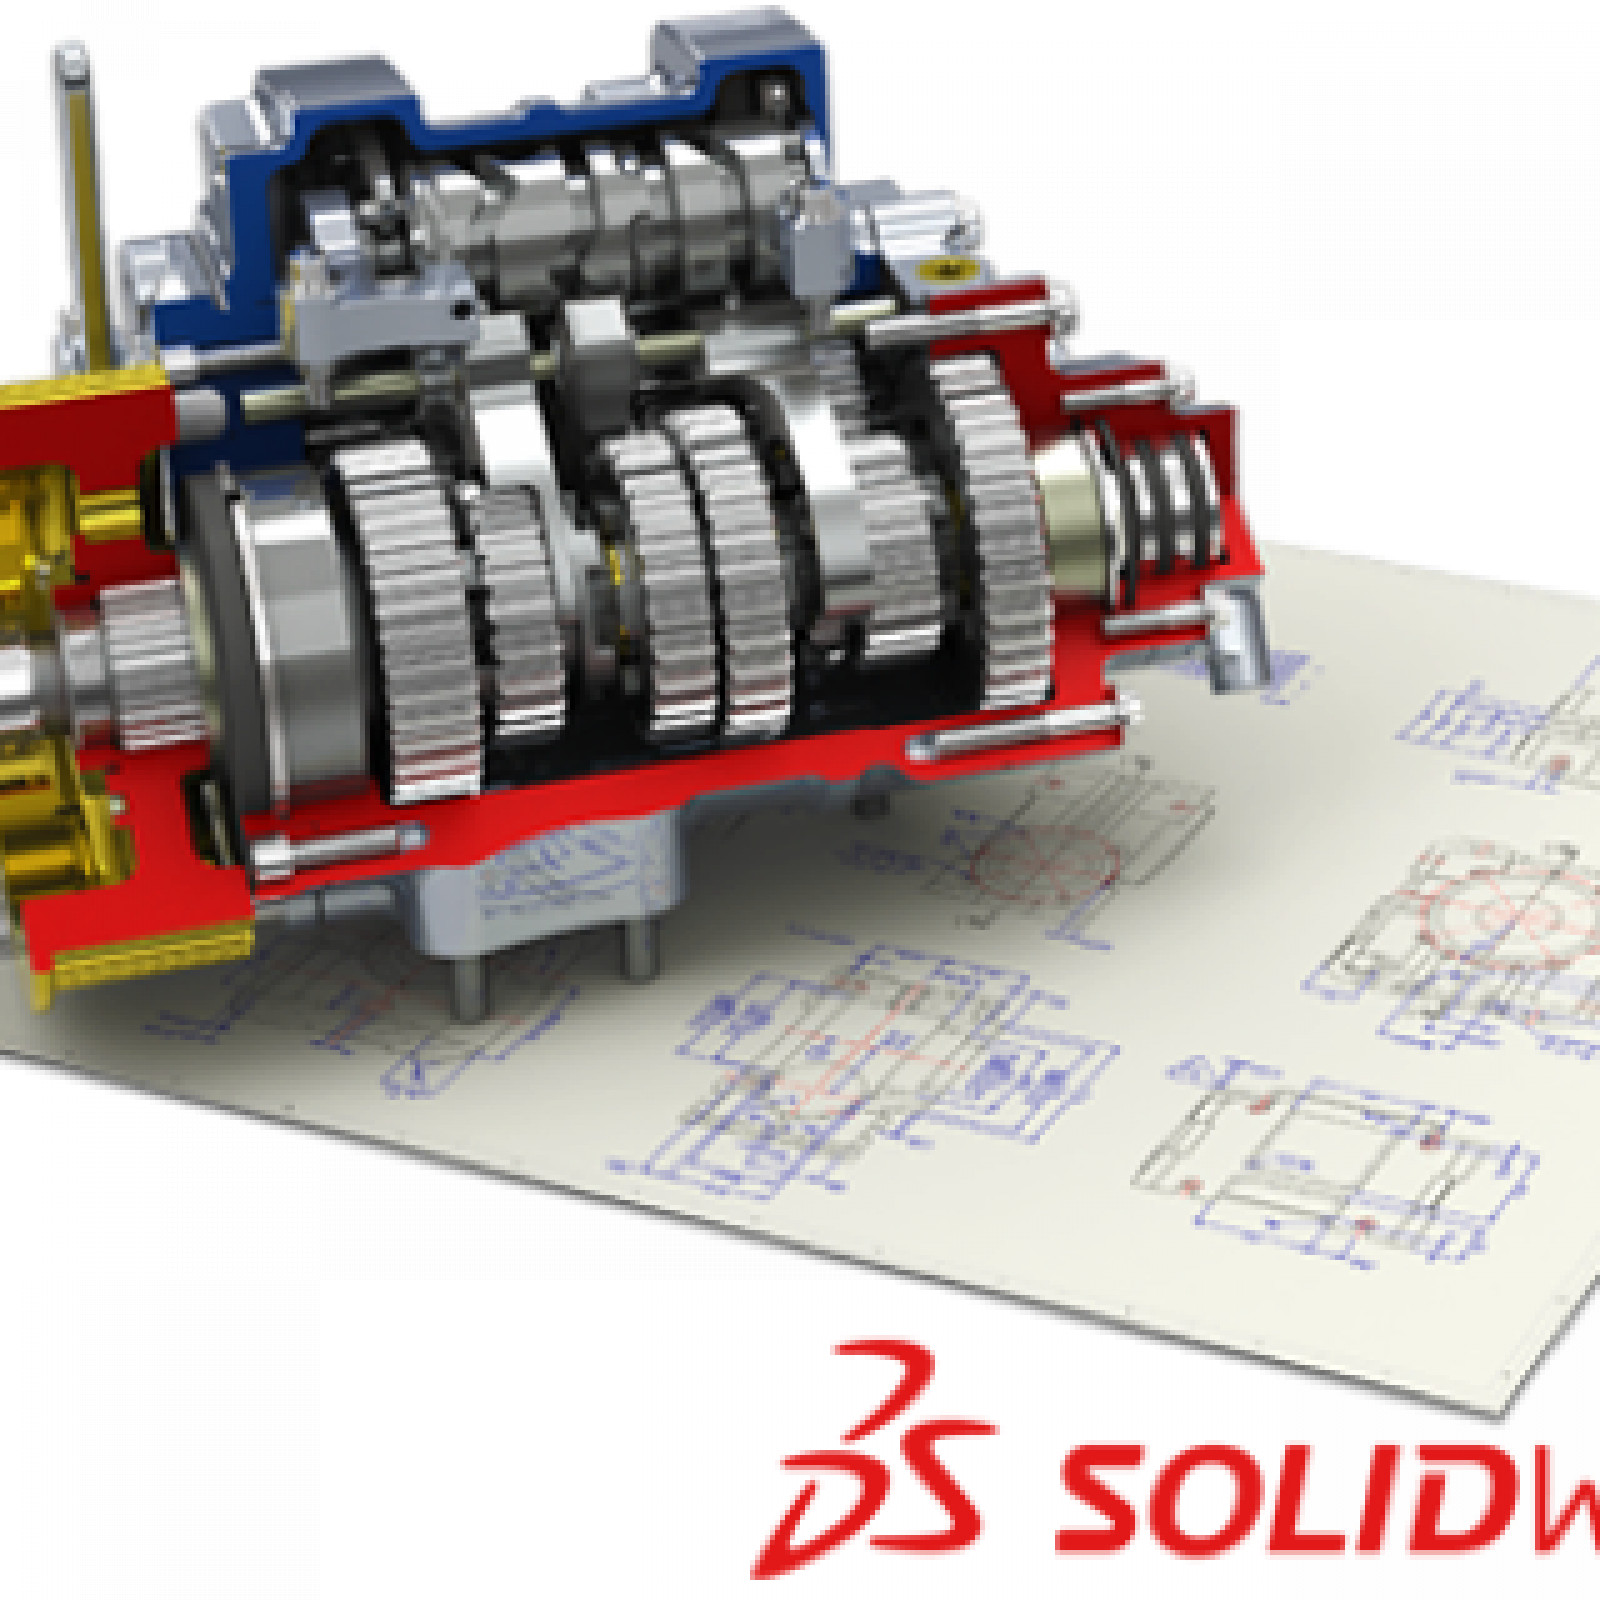 A Review of SolidWorks